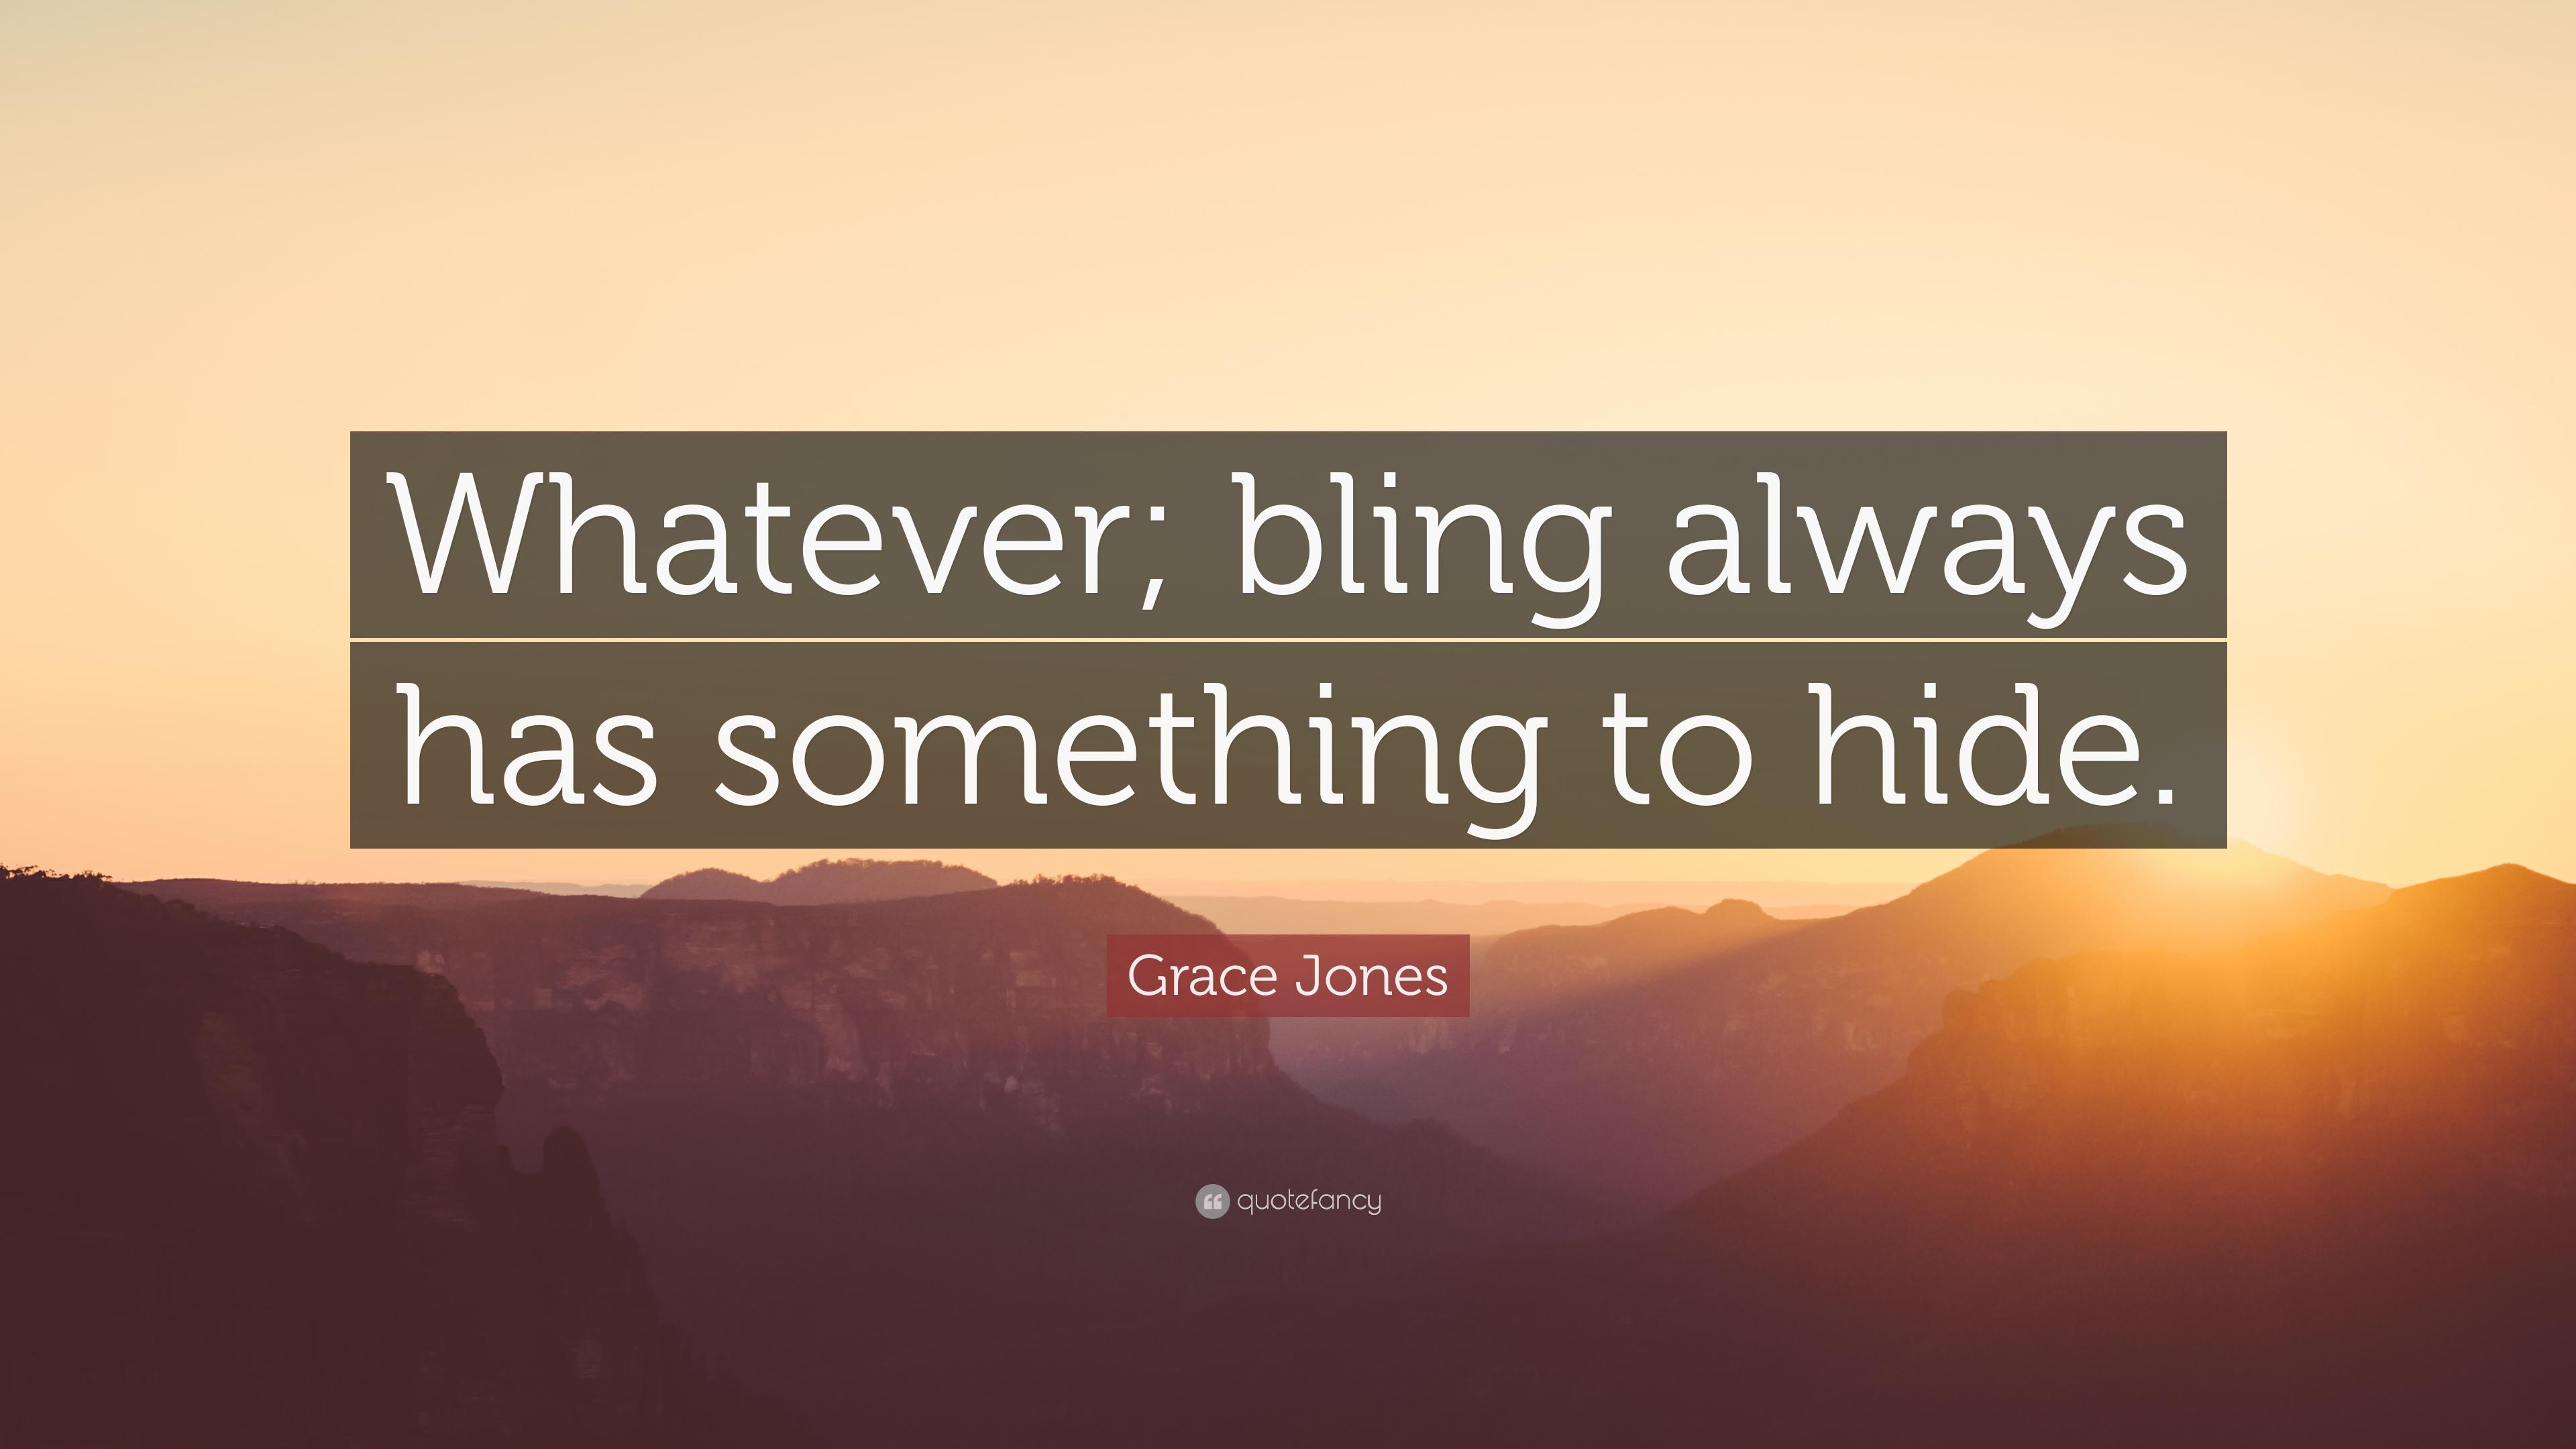 Grace Jones Quote: “Whatever; bling always has something to hide